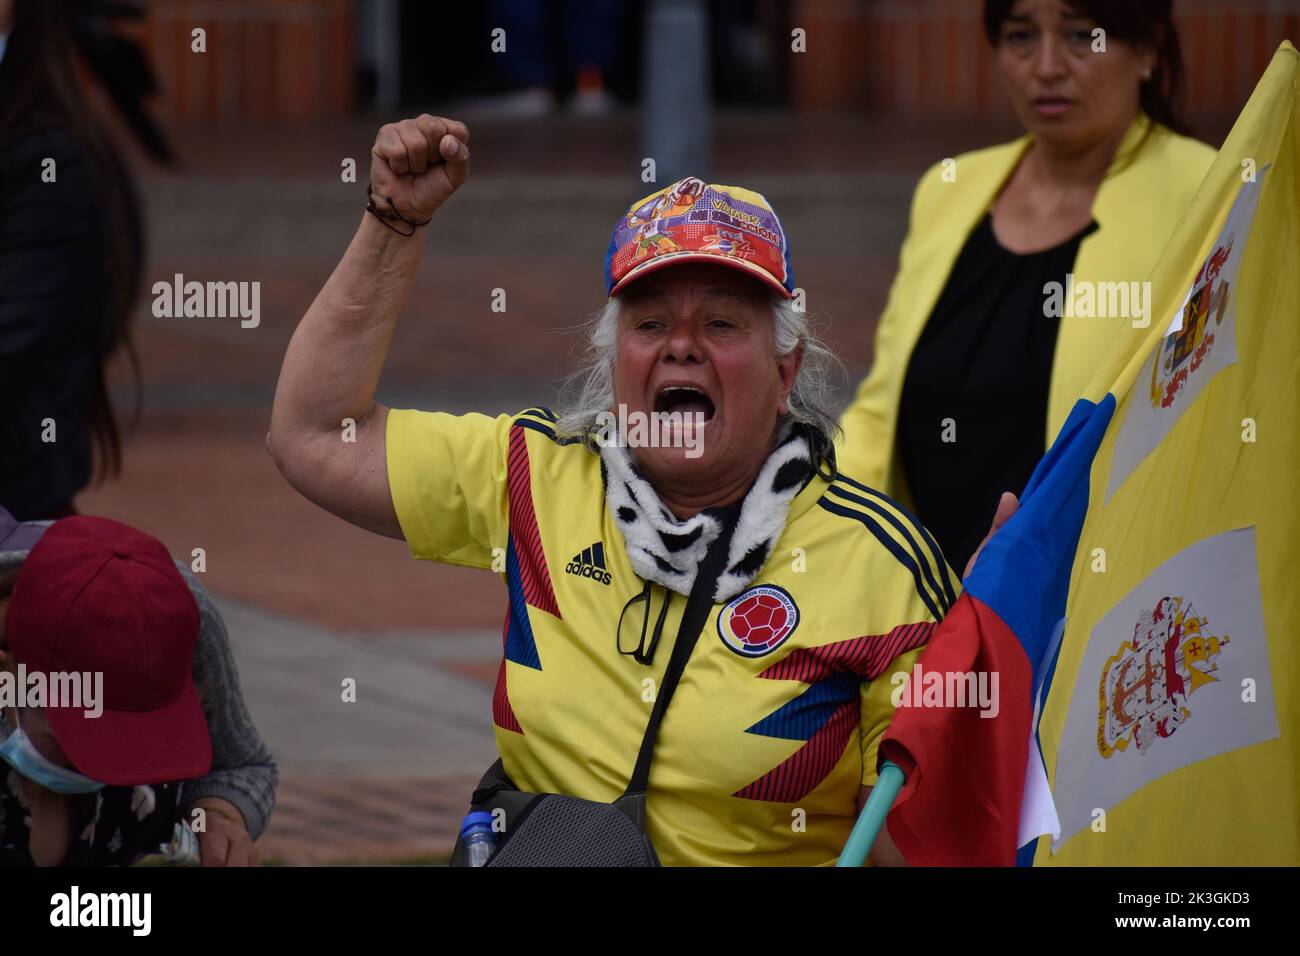 Bogota, Colombia, September 26, 2022. A demonstrator shouts during the first antigovernment protest against left-wing president Gustavo Petro and his initiative on a tax reform, in Bogota, Colombia, September 26, 2022. Photo by: Cristian Bayona/Long Visual Press Stock Photo